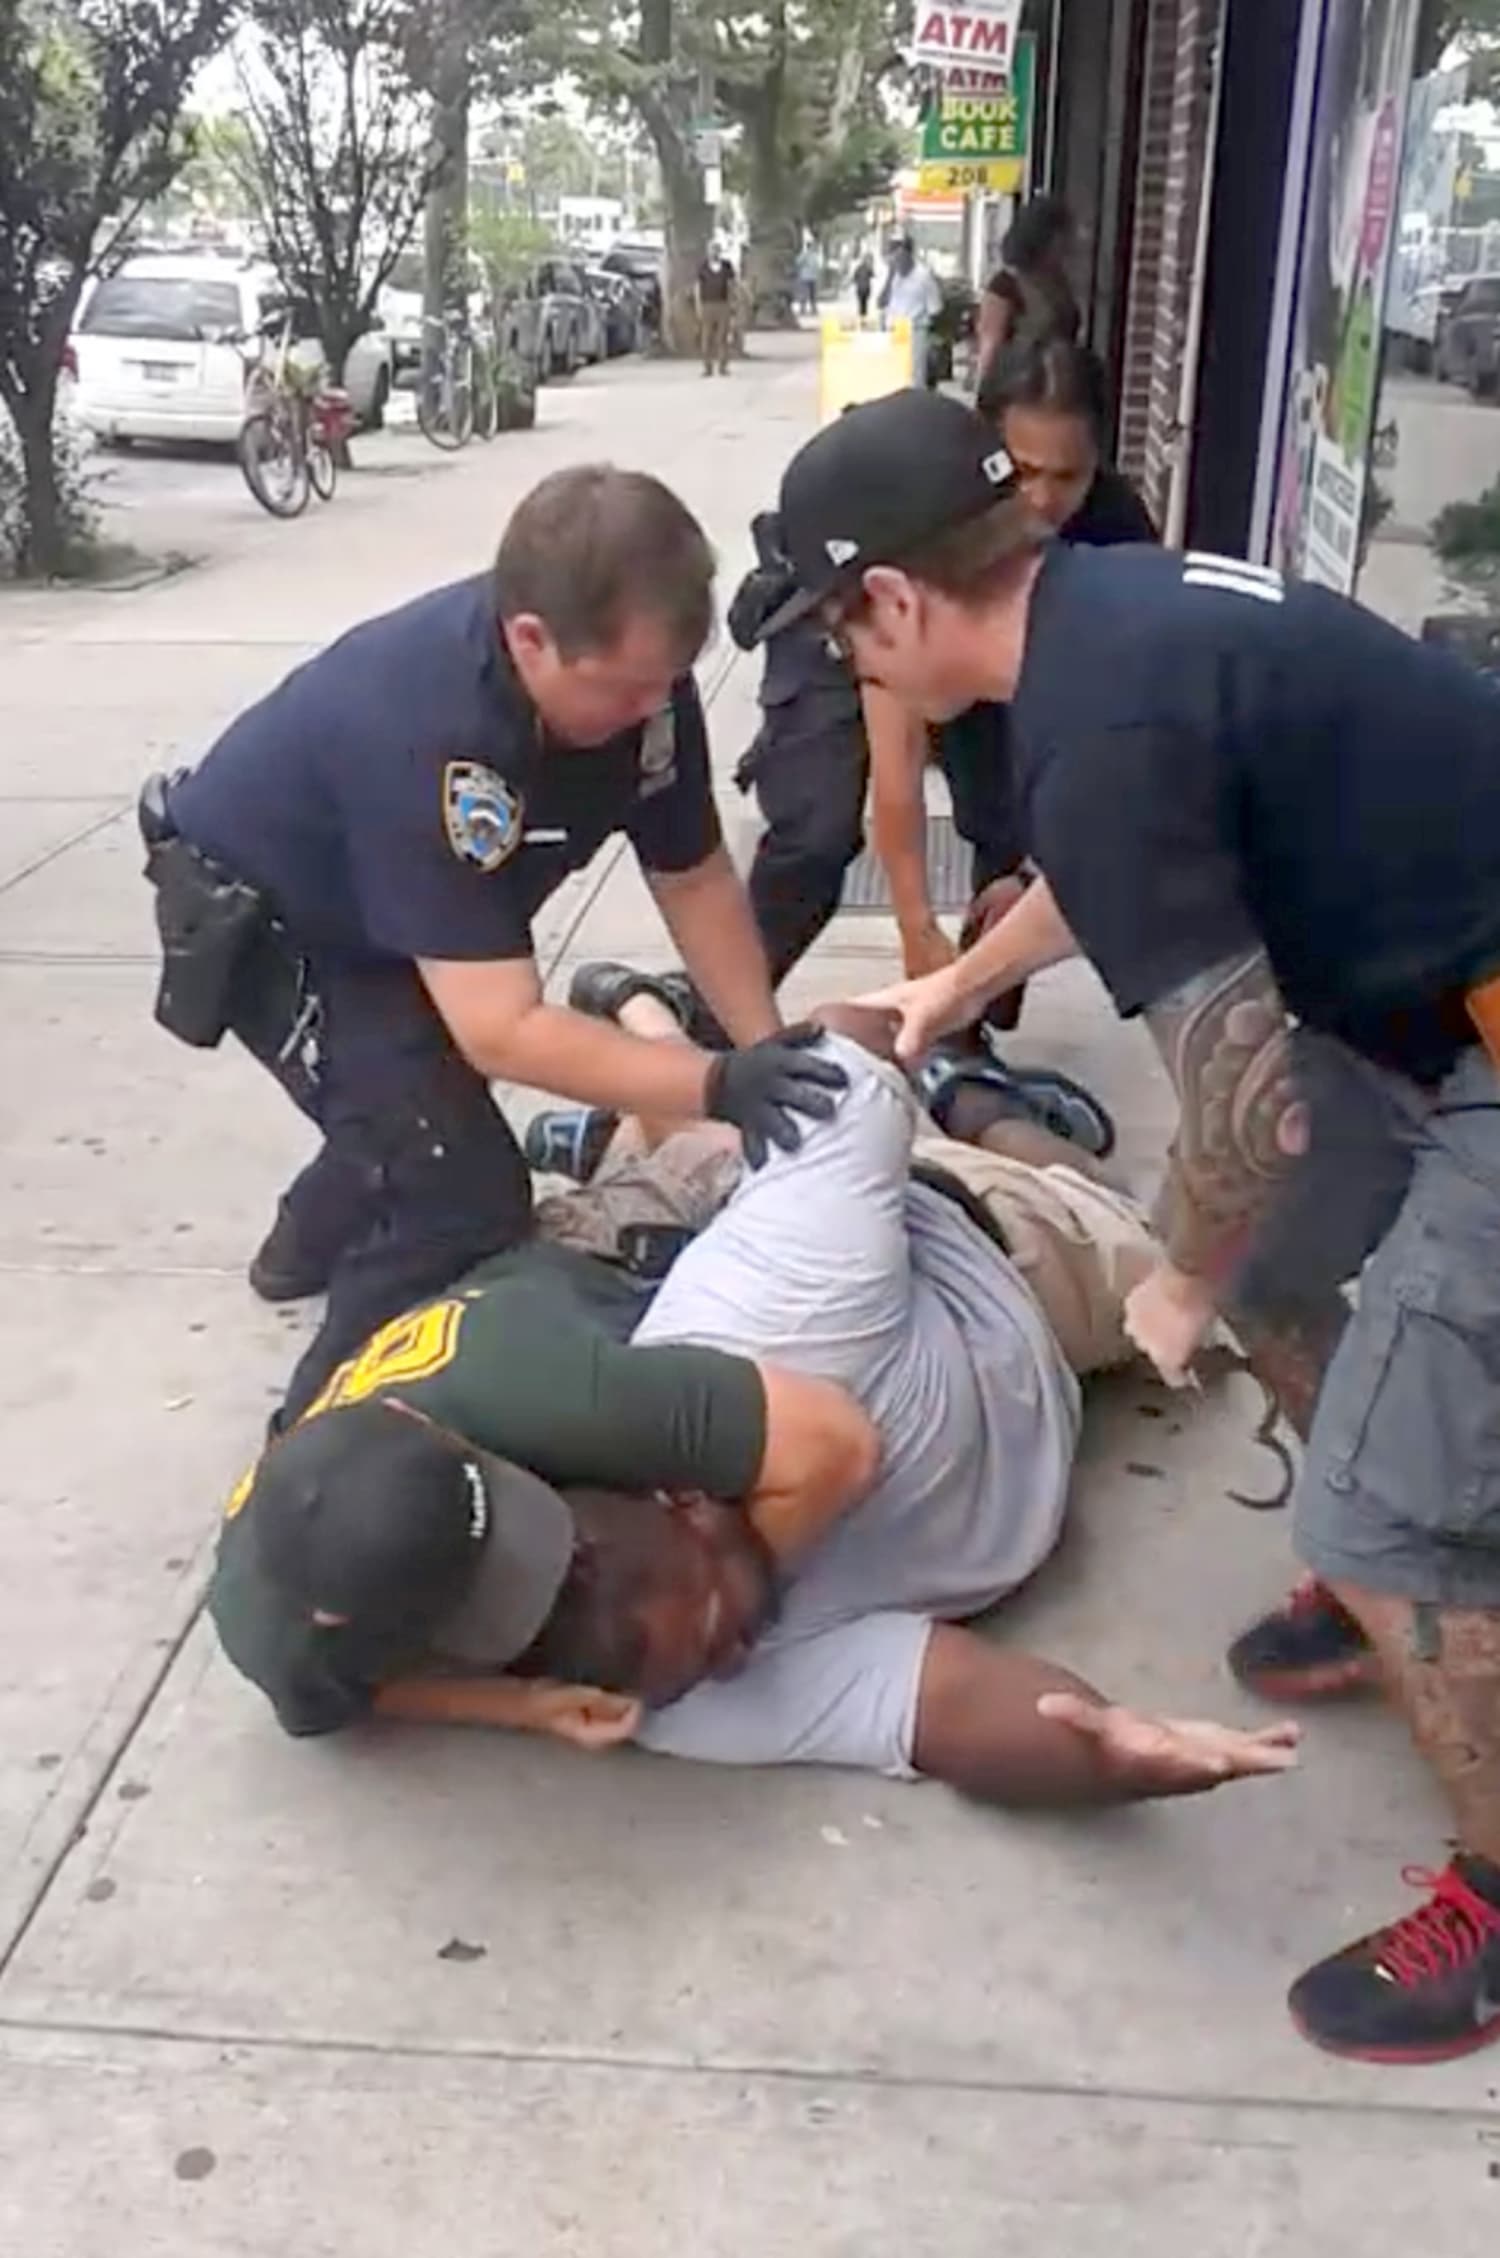 Nypd Officers In Eric Garner Case Face Disciplinary Action